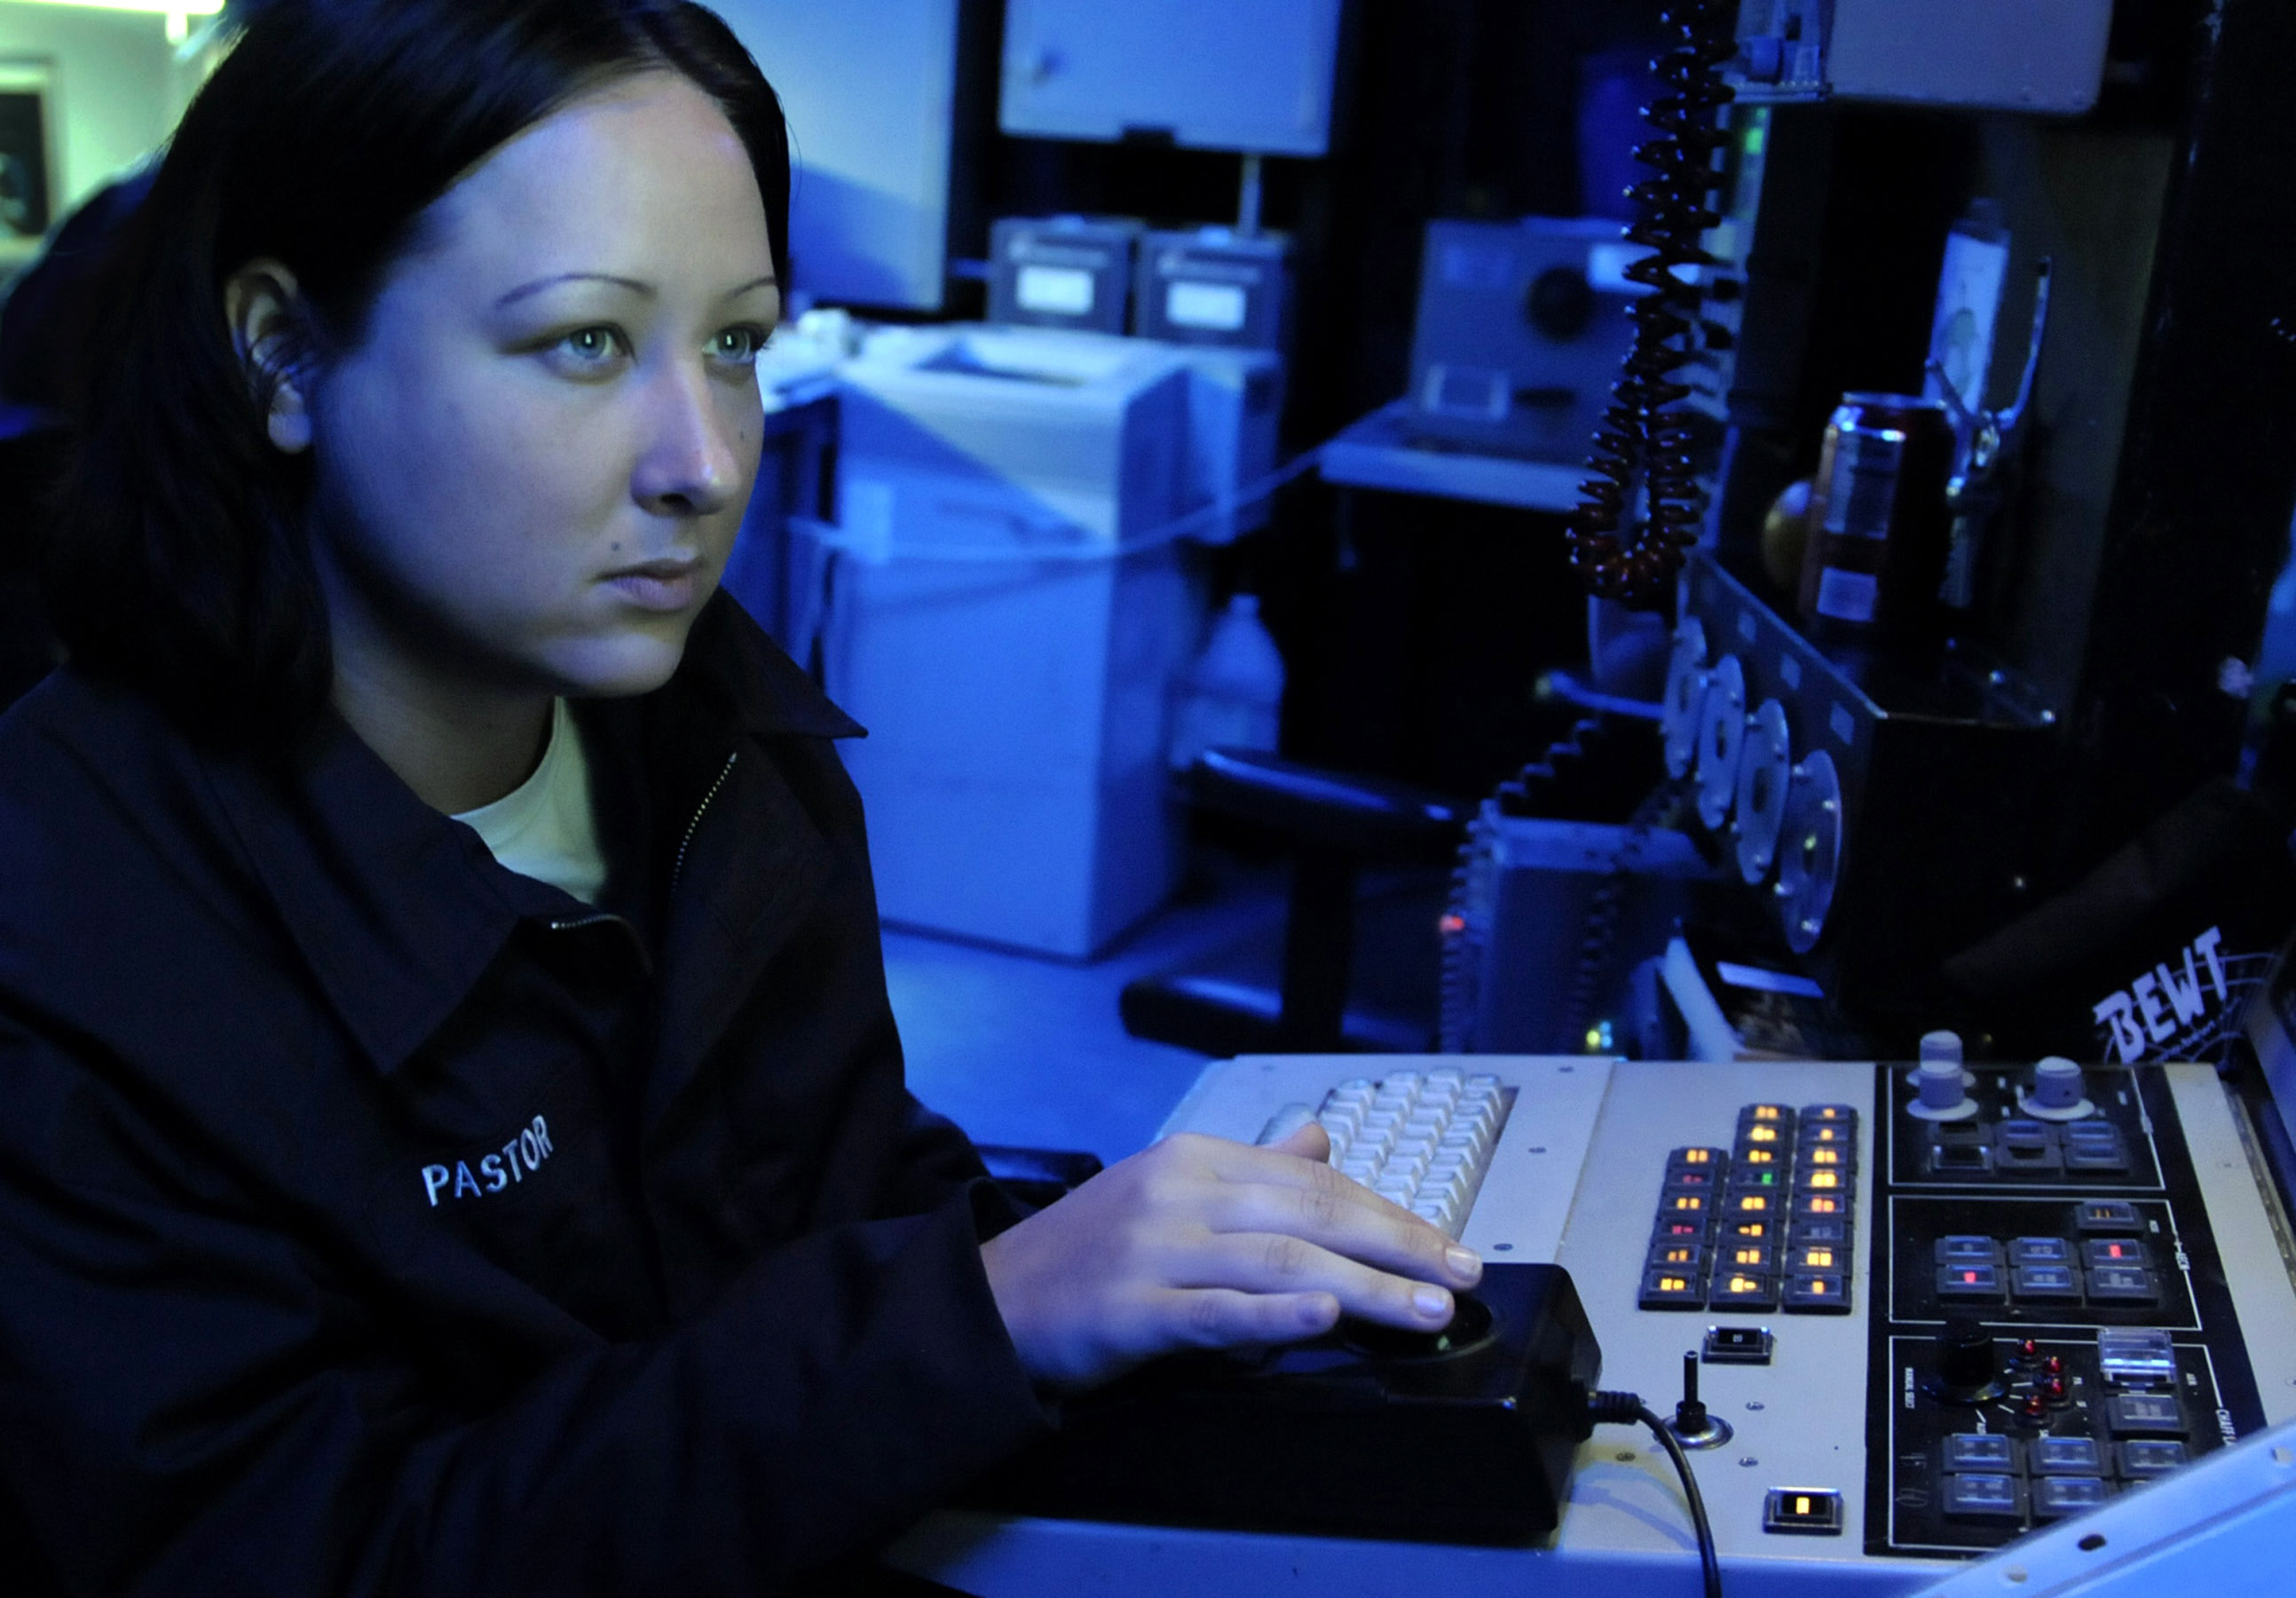 US_Navy_091019-N-7478G-090_Cryptologic_Technician_(Technical)_Seaman_Jennifer_Pastor_stands_watch_at_the_Surface_Electronics_Emission_Console_(SLQ-32)_in_the_combat_information_center_aboard_the_amphibious_command_ship_USS_Blue.jpg